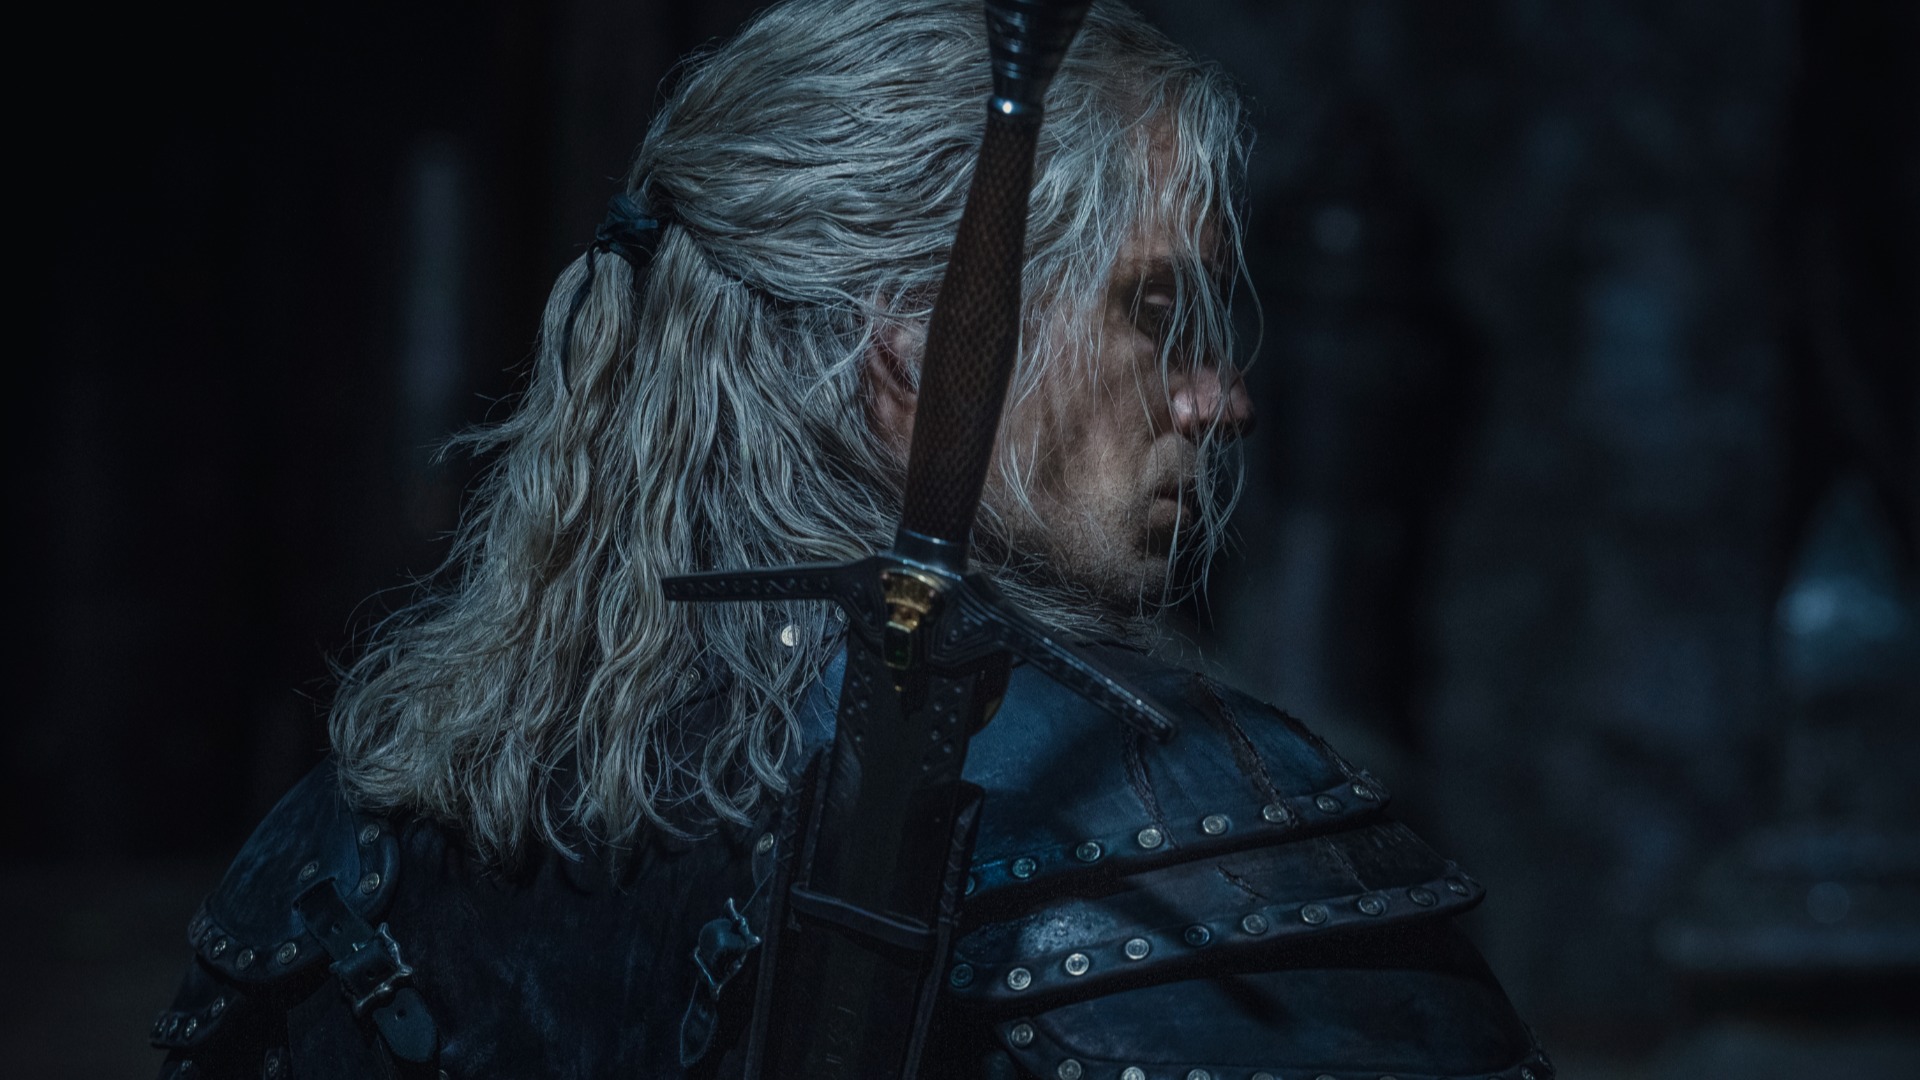 The Witcher season 3 part 2: The Witcher Season 4: Liam Hemsworth to play  Geralt amidst actors' strike - The Economic Times